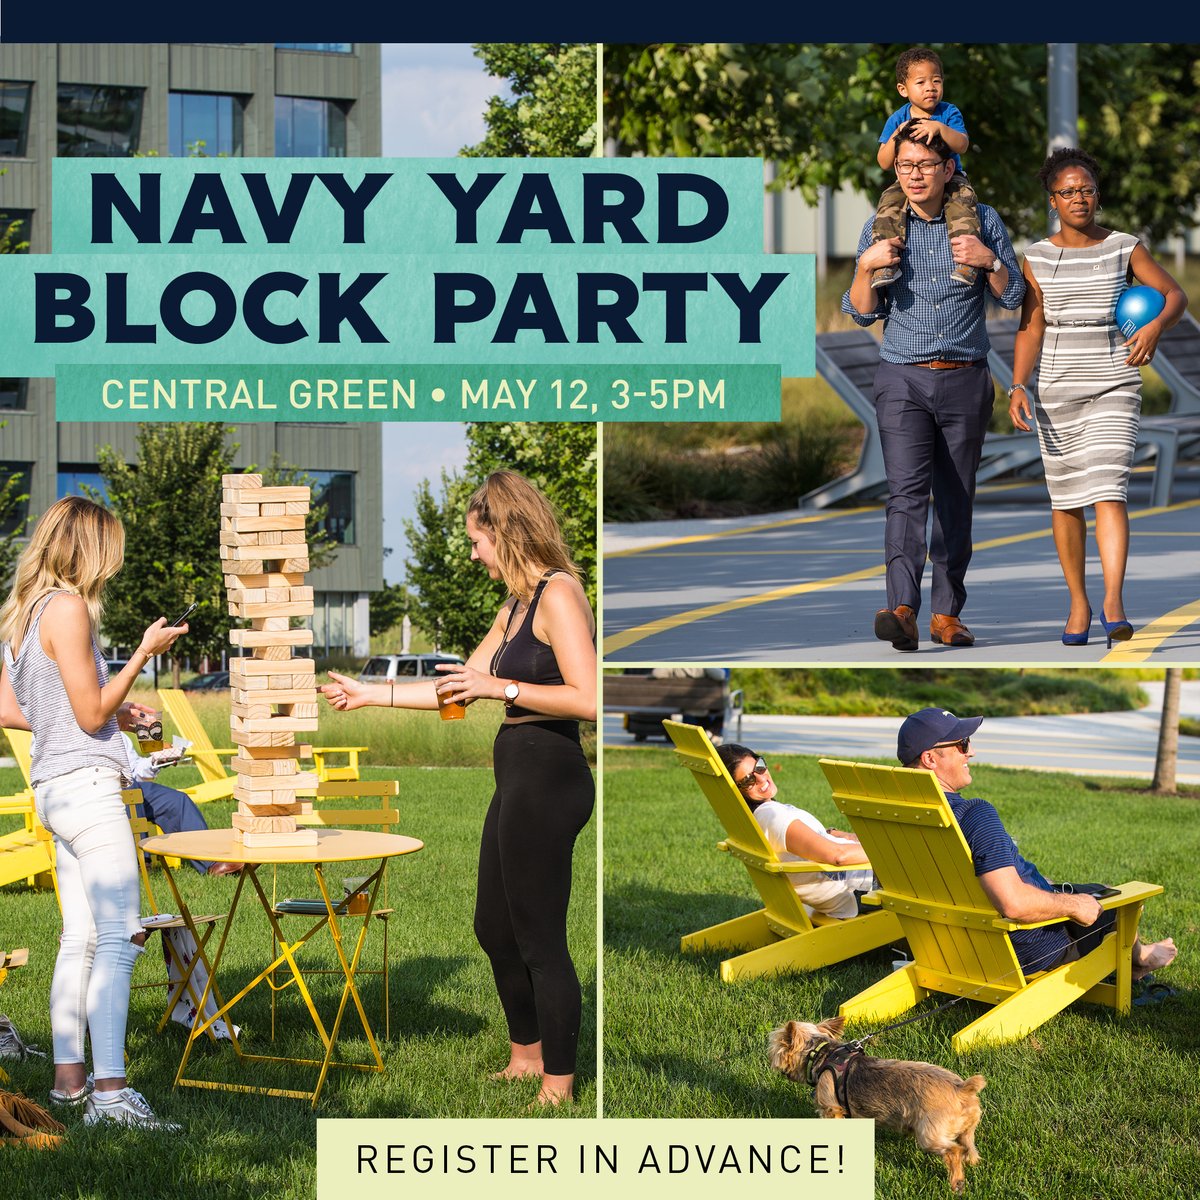 Celebrate the Navy Yard, our community, and our future with a block party at Central Green! Free to attend; advanced registration: bit.ly/3LqzoDO

@pidc @EnsembleRES  @BrokerageMosaic  @fieldoperations
#navyyardplan #discovertheyard #phillyevent #blockparty #centralgreen